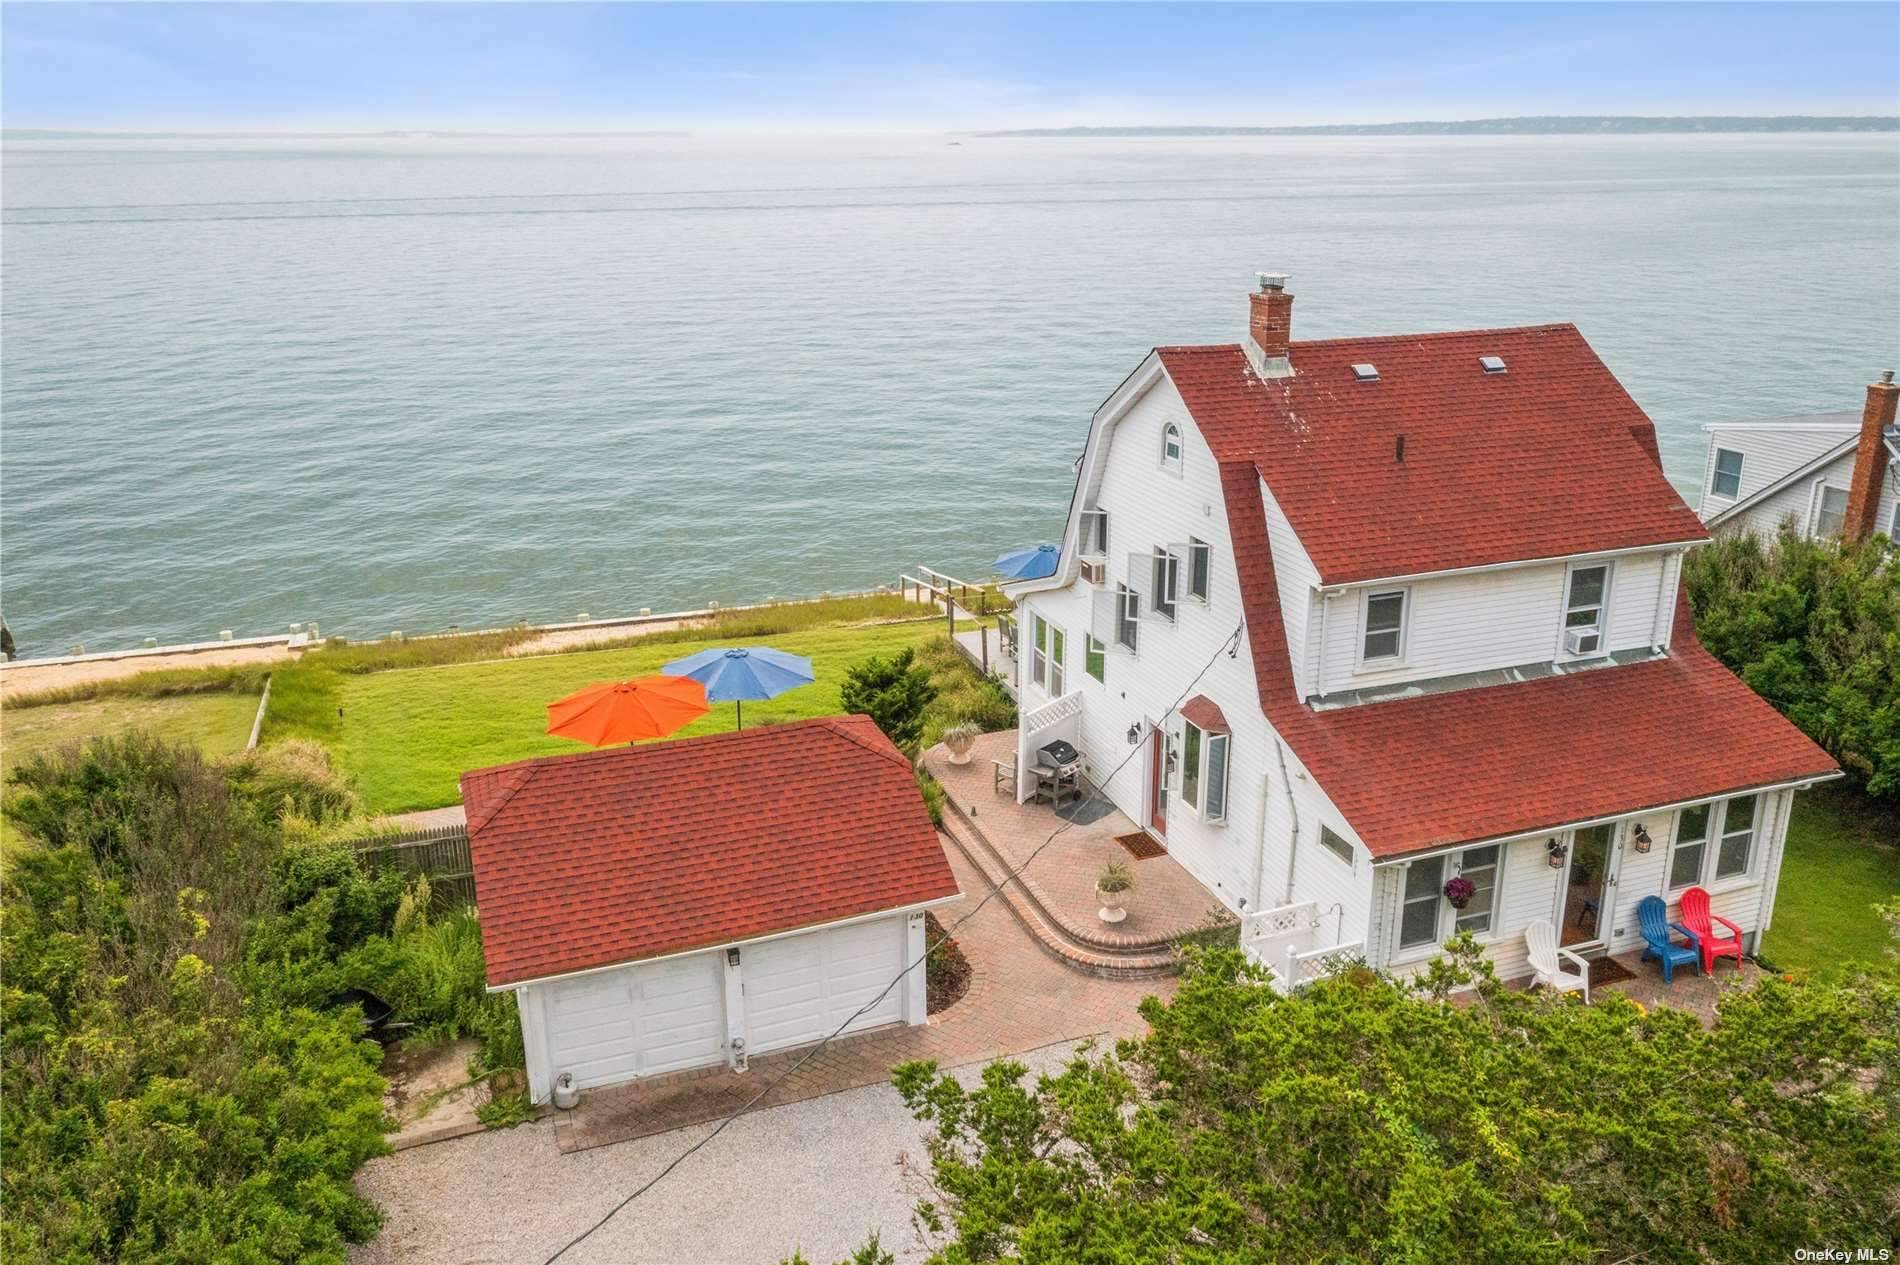 Enjoy the breathtaking views in this exclusive Bayfront home, 1 of 6 homes in a private entity on Little Peconic Bay.